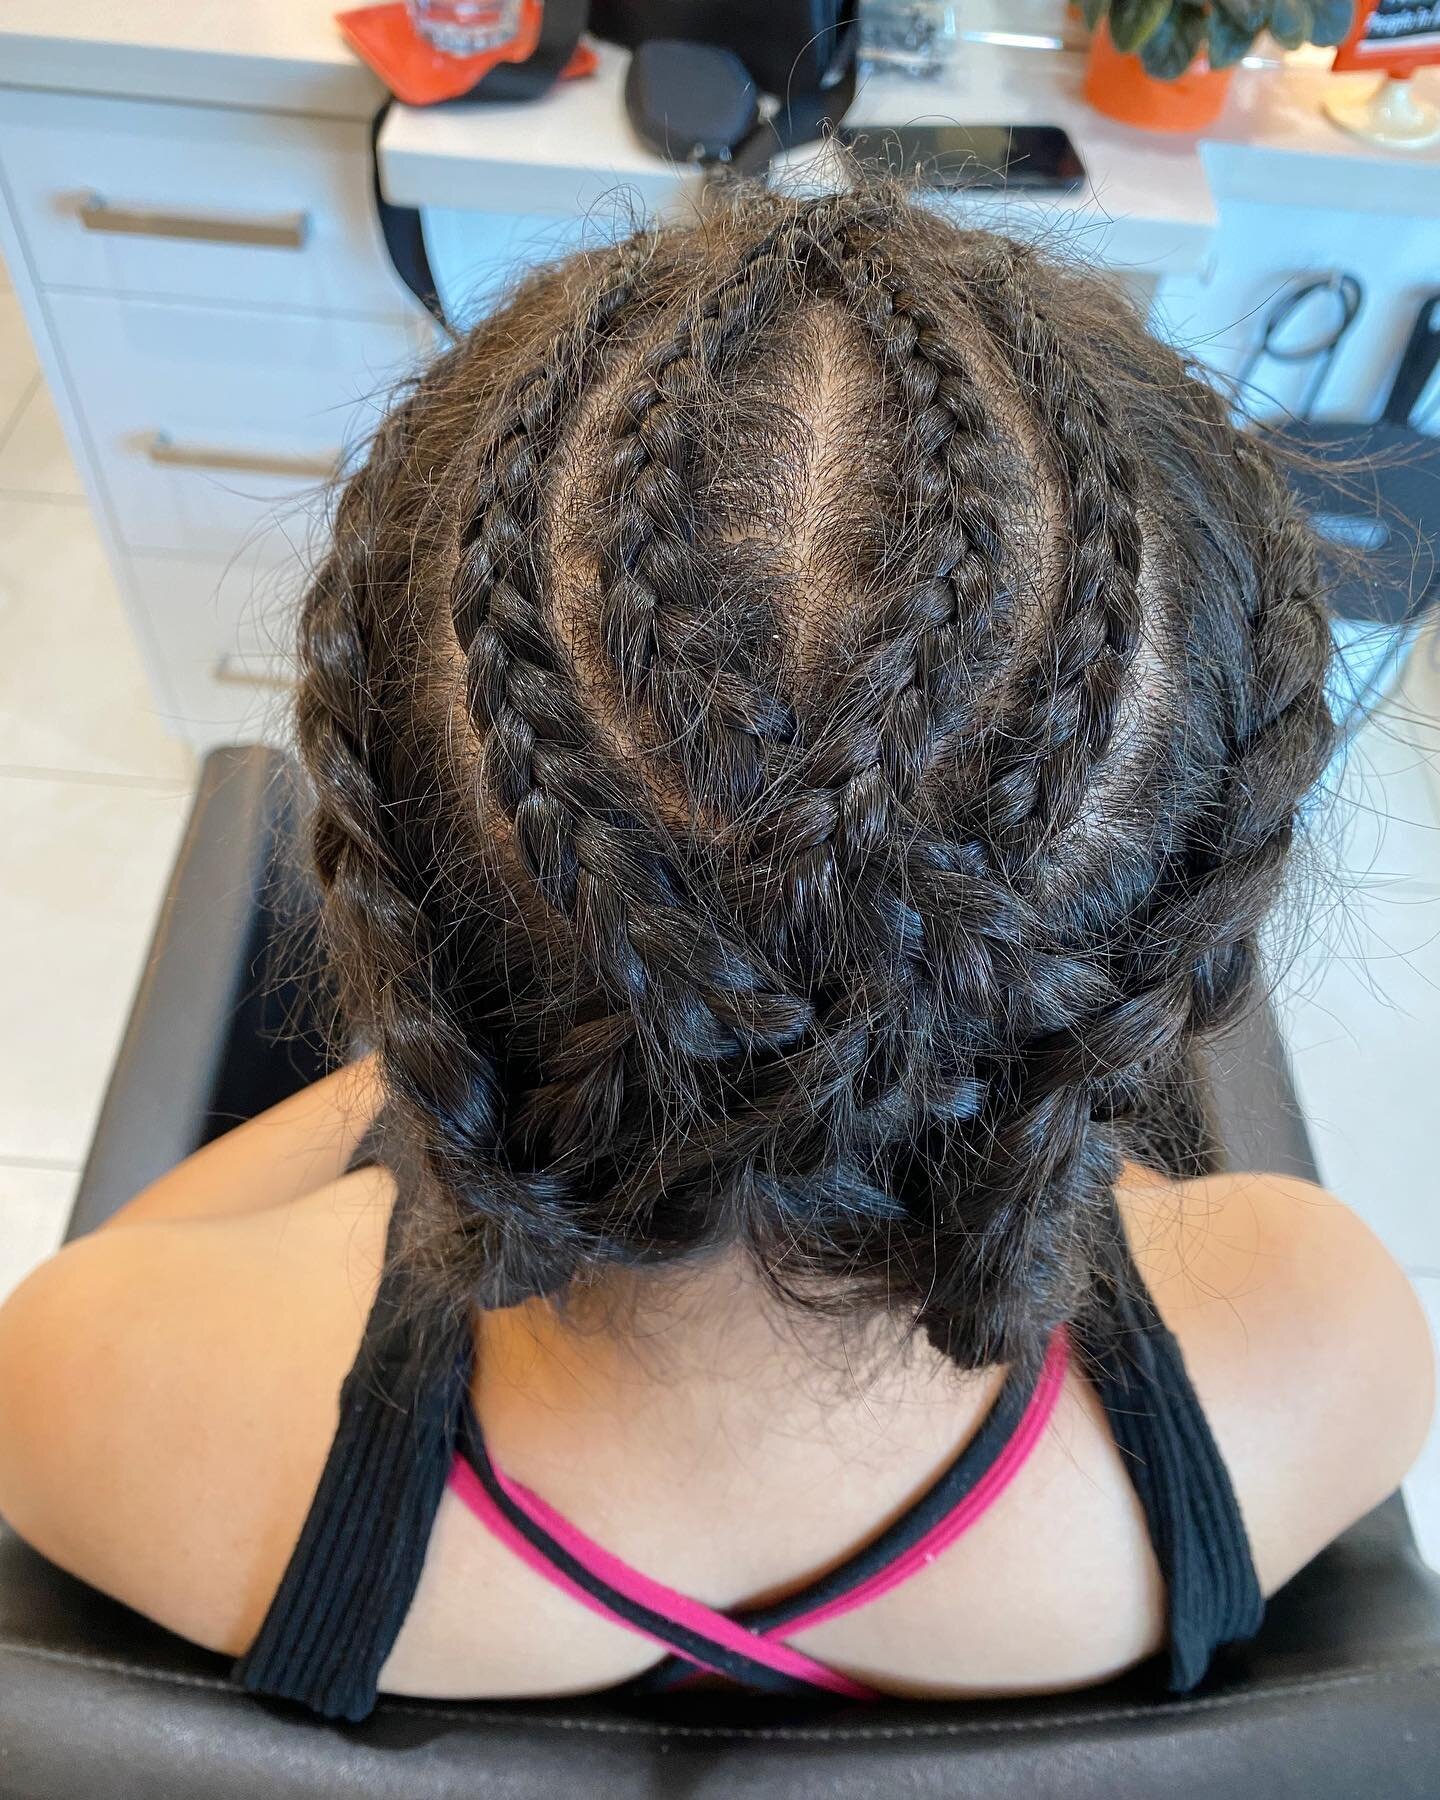 First in Vancut Hair Salon! Saba is extensively trained in all aspects of braiding including our favorite cornrows! Text us at 778-231-2707 to book! 😍🤩

#coquitlam #coquitlamhair #braidedhairstyles #braided #braidedhair #vancouver #vancouverhair #v